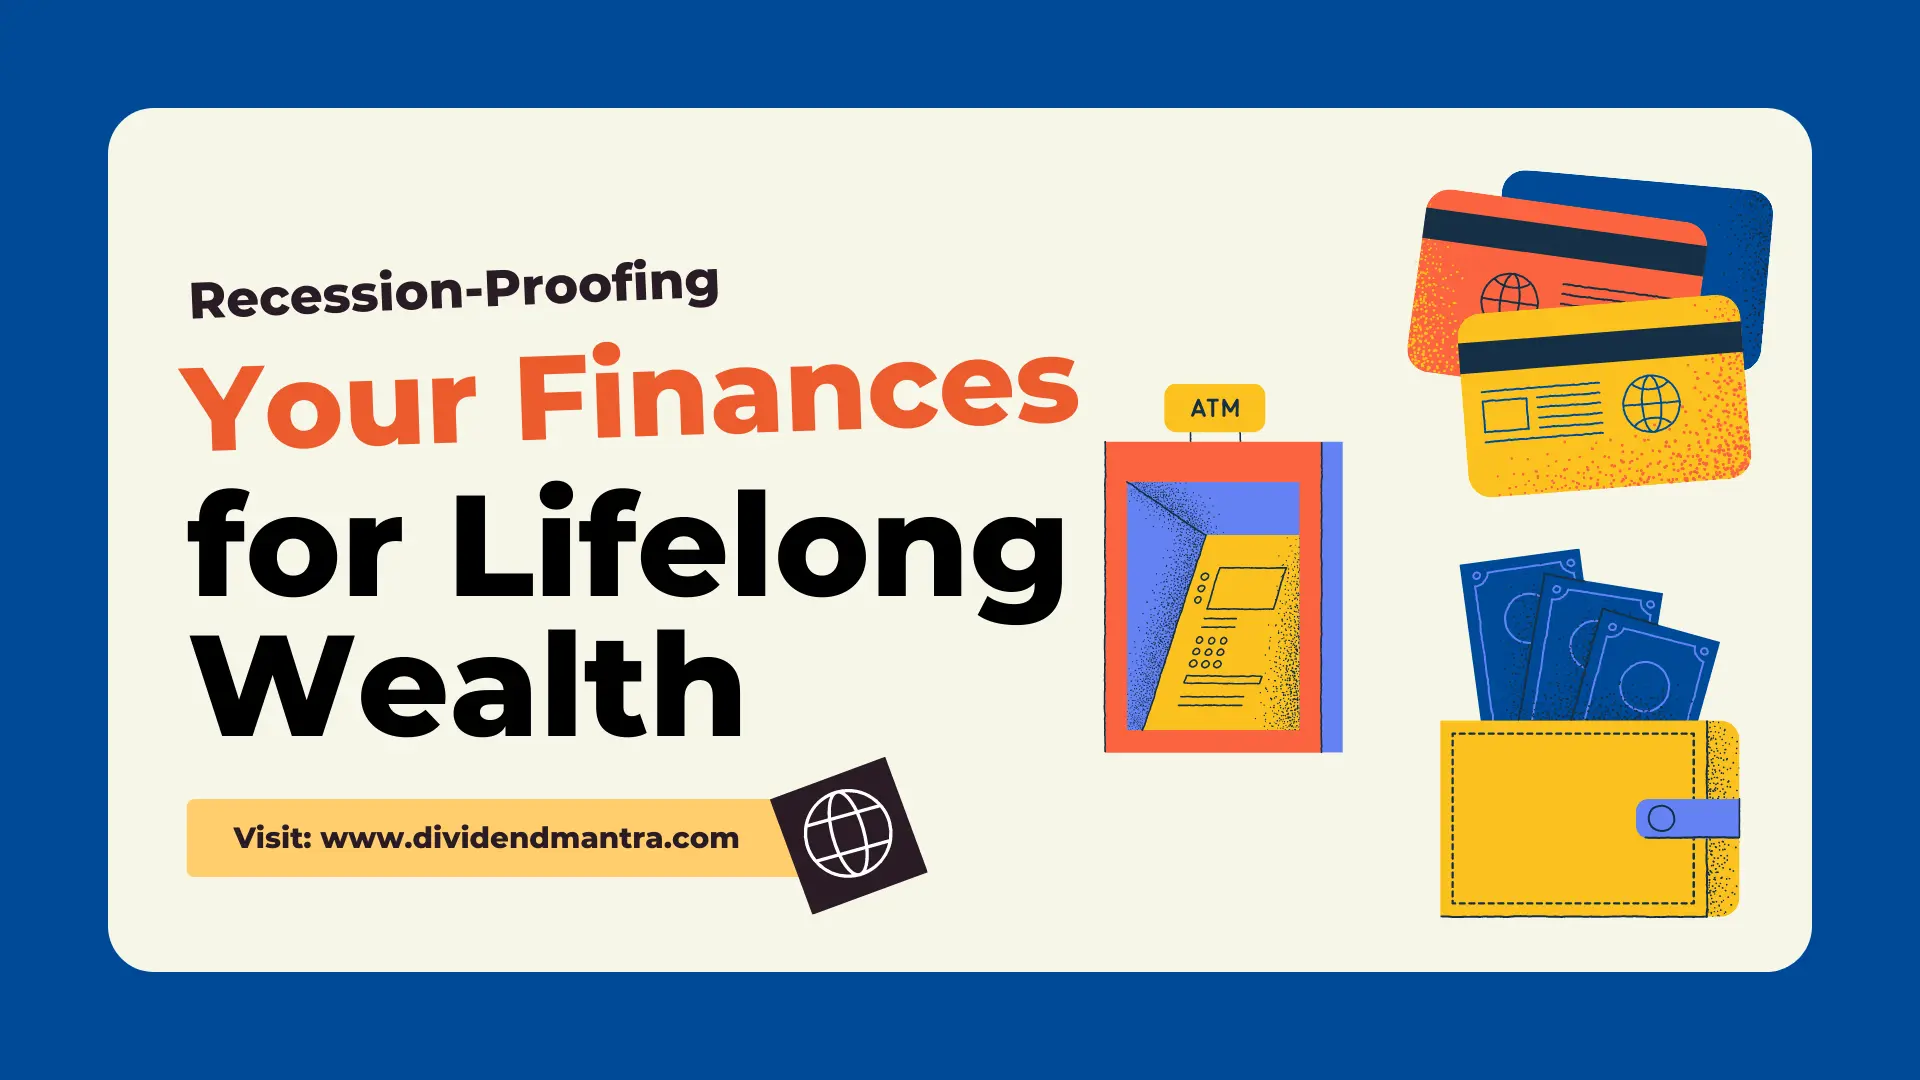 Recession-Proofing Your Finances for Lifelong Wealth